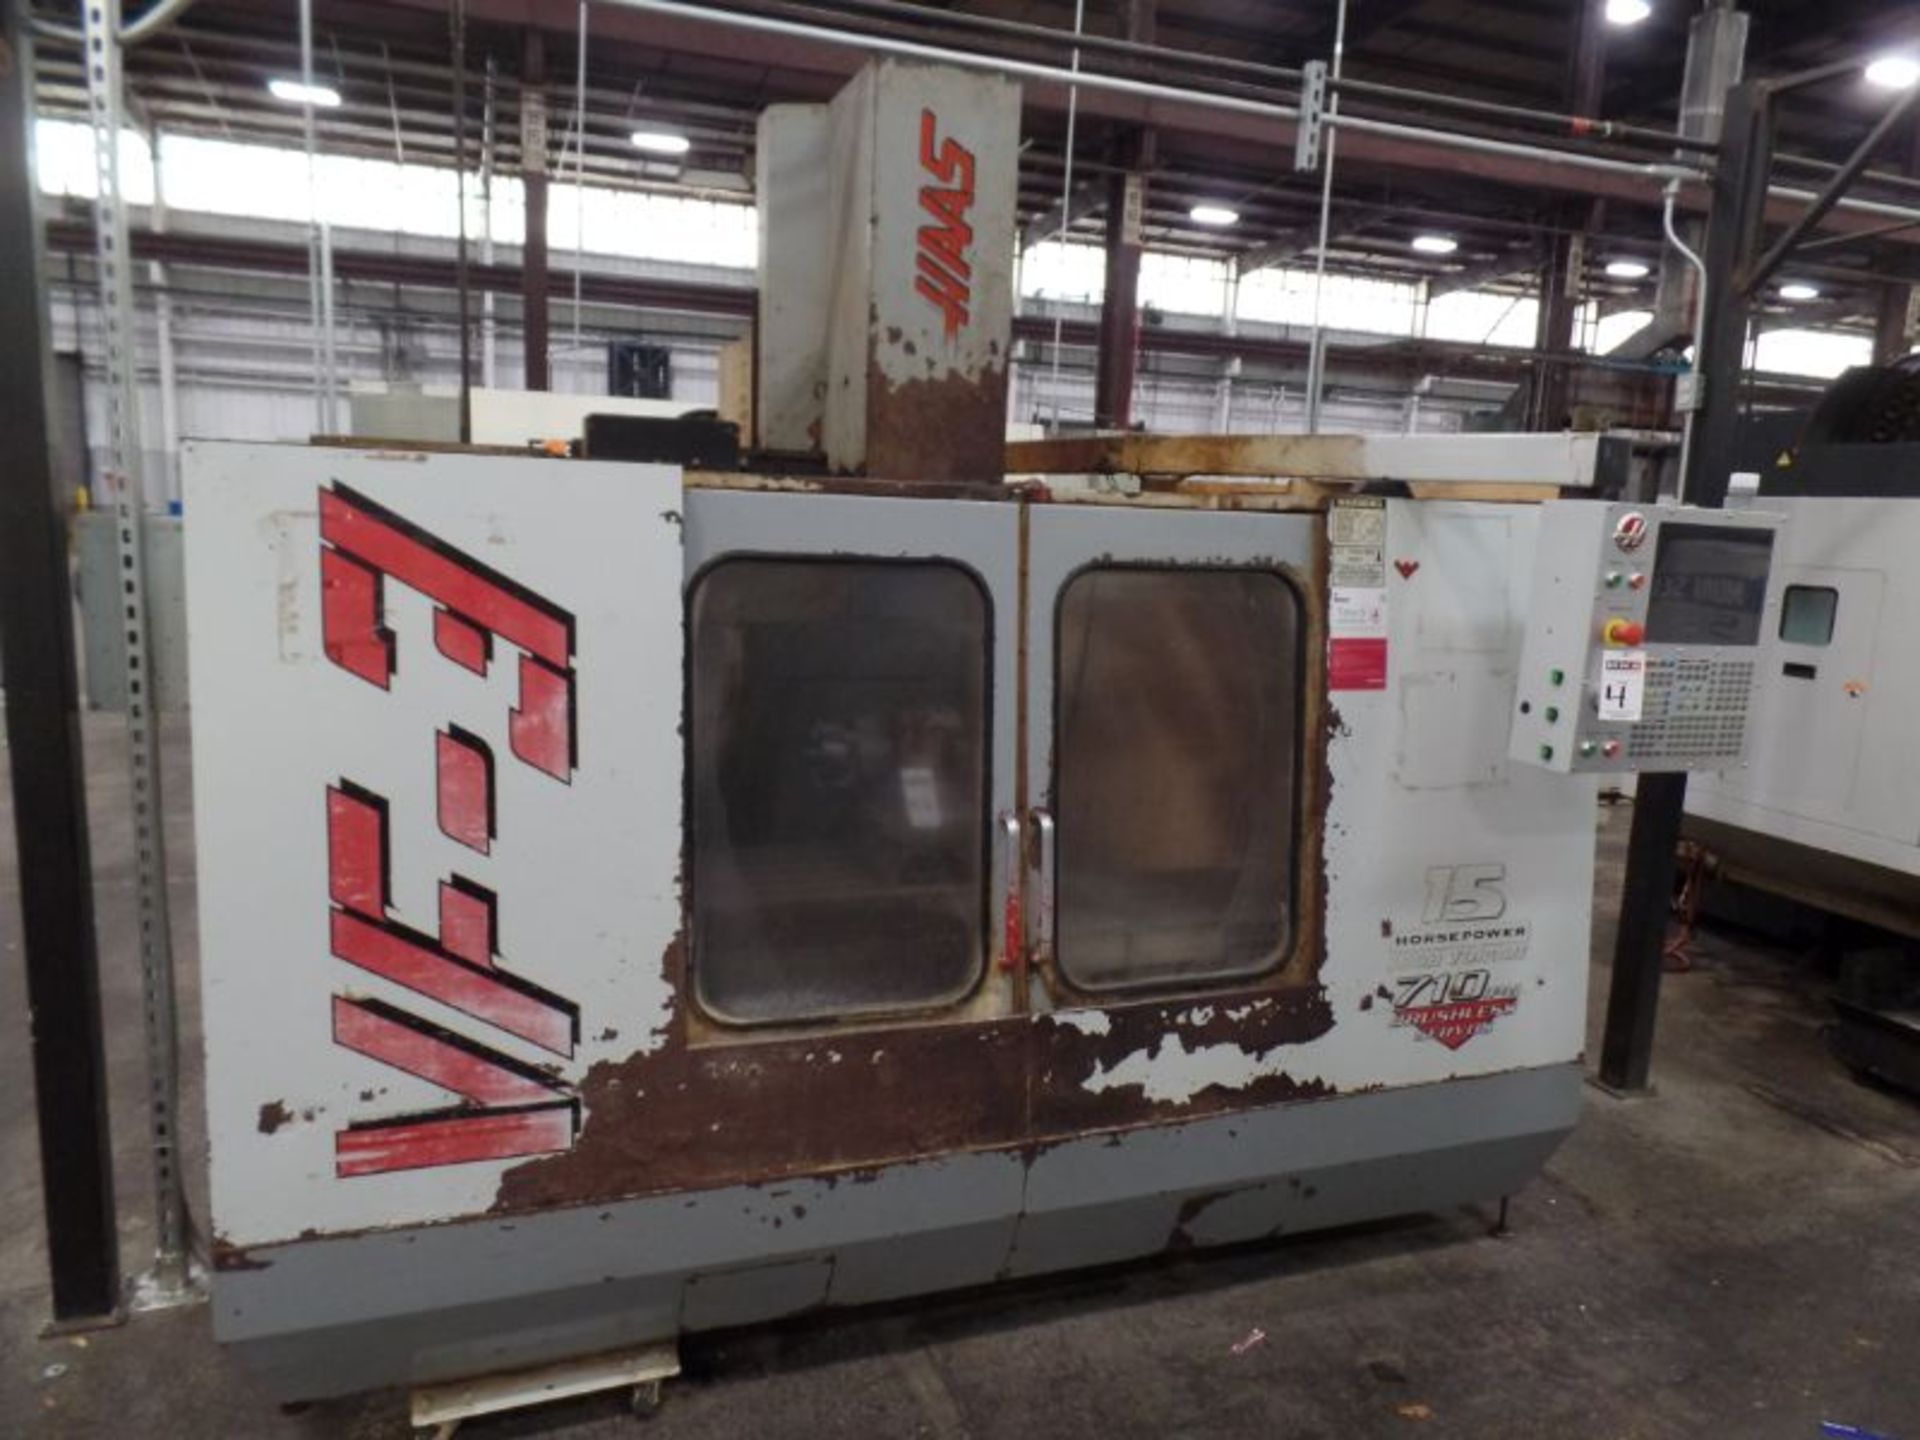 Haas VF-3, Retro’d control, 40”x 20”x 20” Travels, CT40, New 1997 *Indexer Sold Separate*